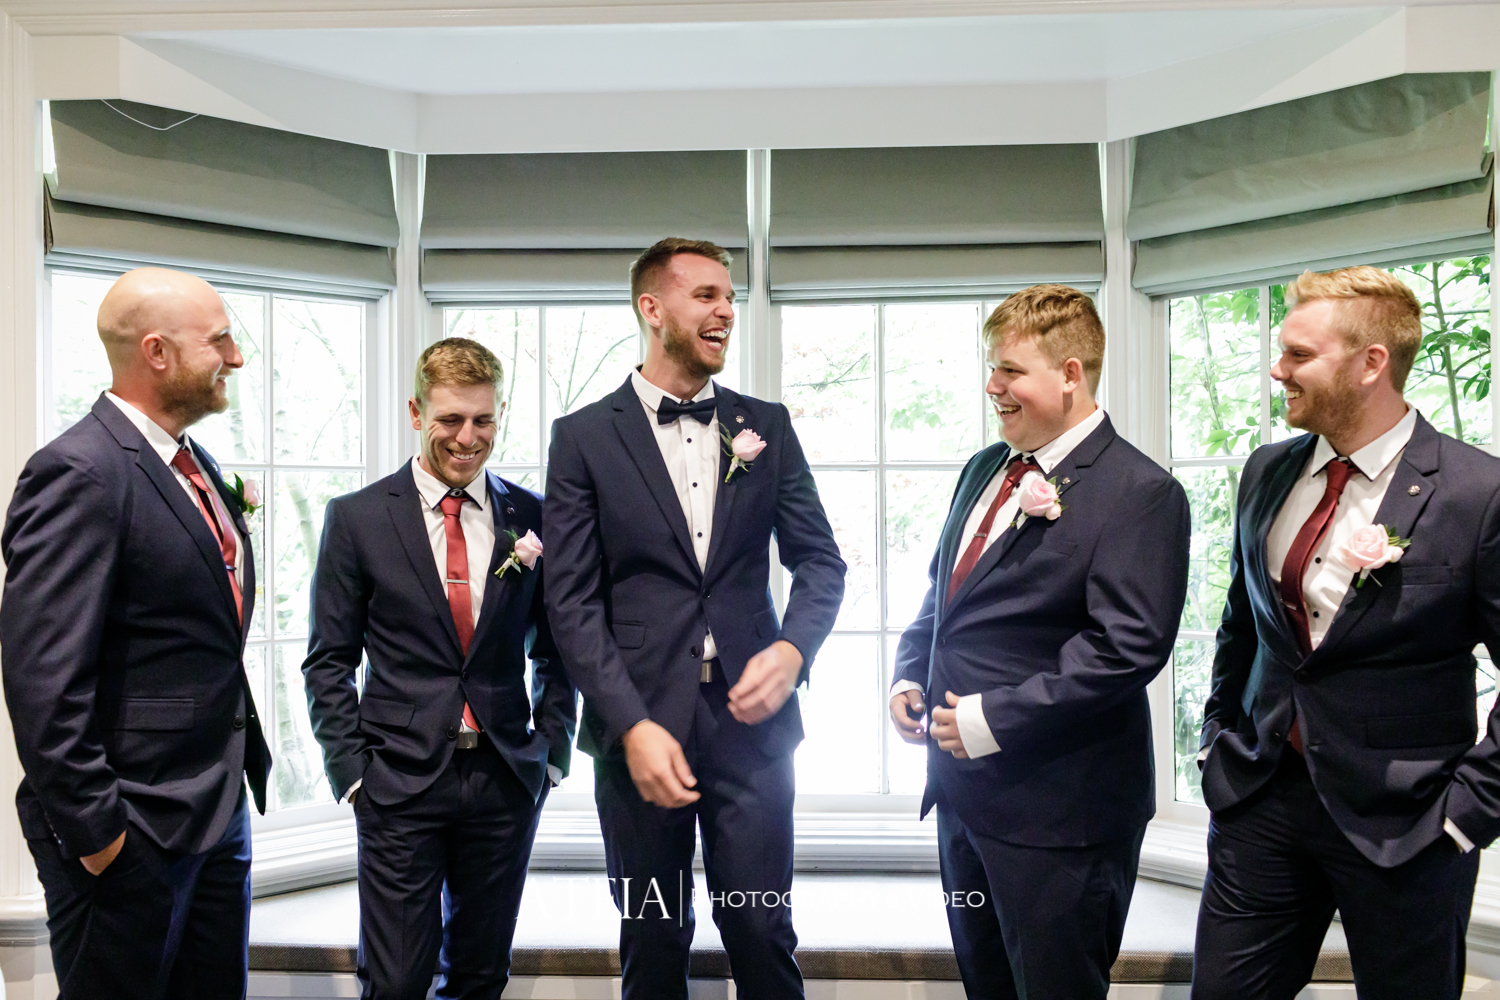 , Tatra Receptions Wedding Photography Melbourne by ATEIA Photography &#038; Video